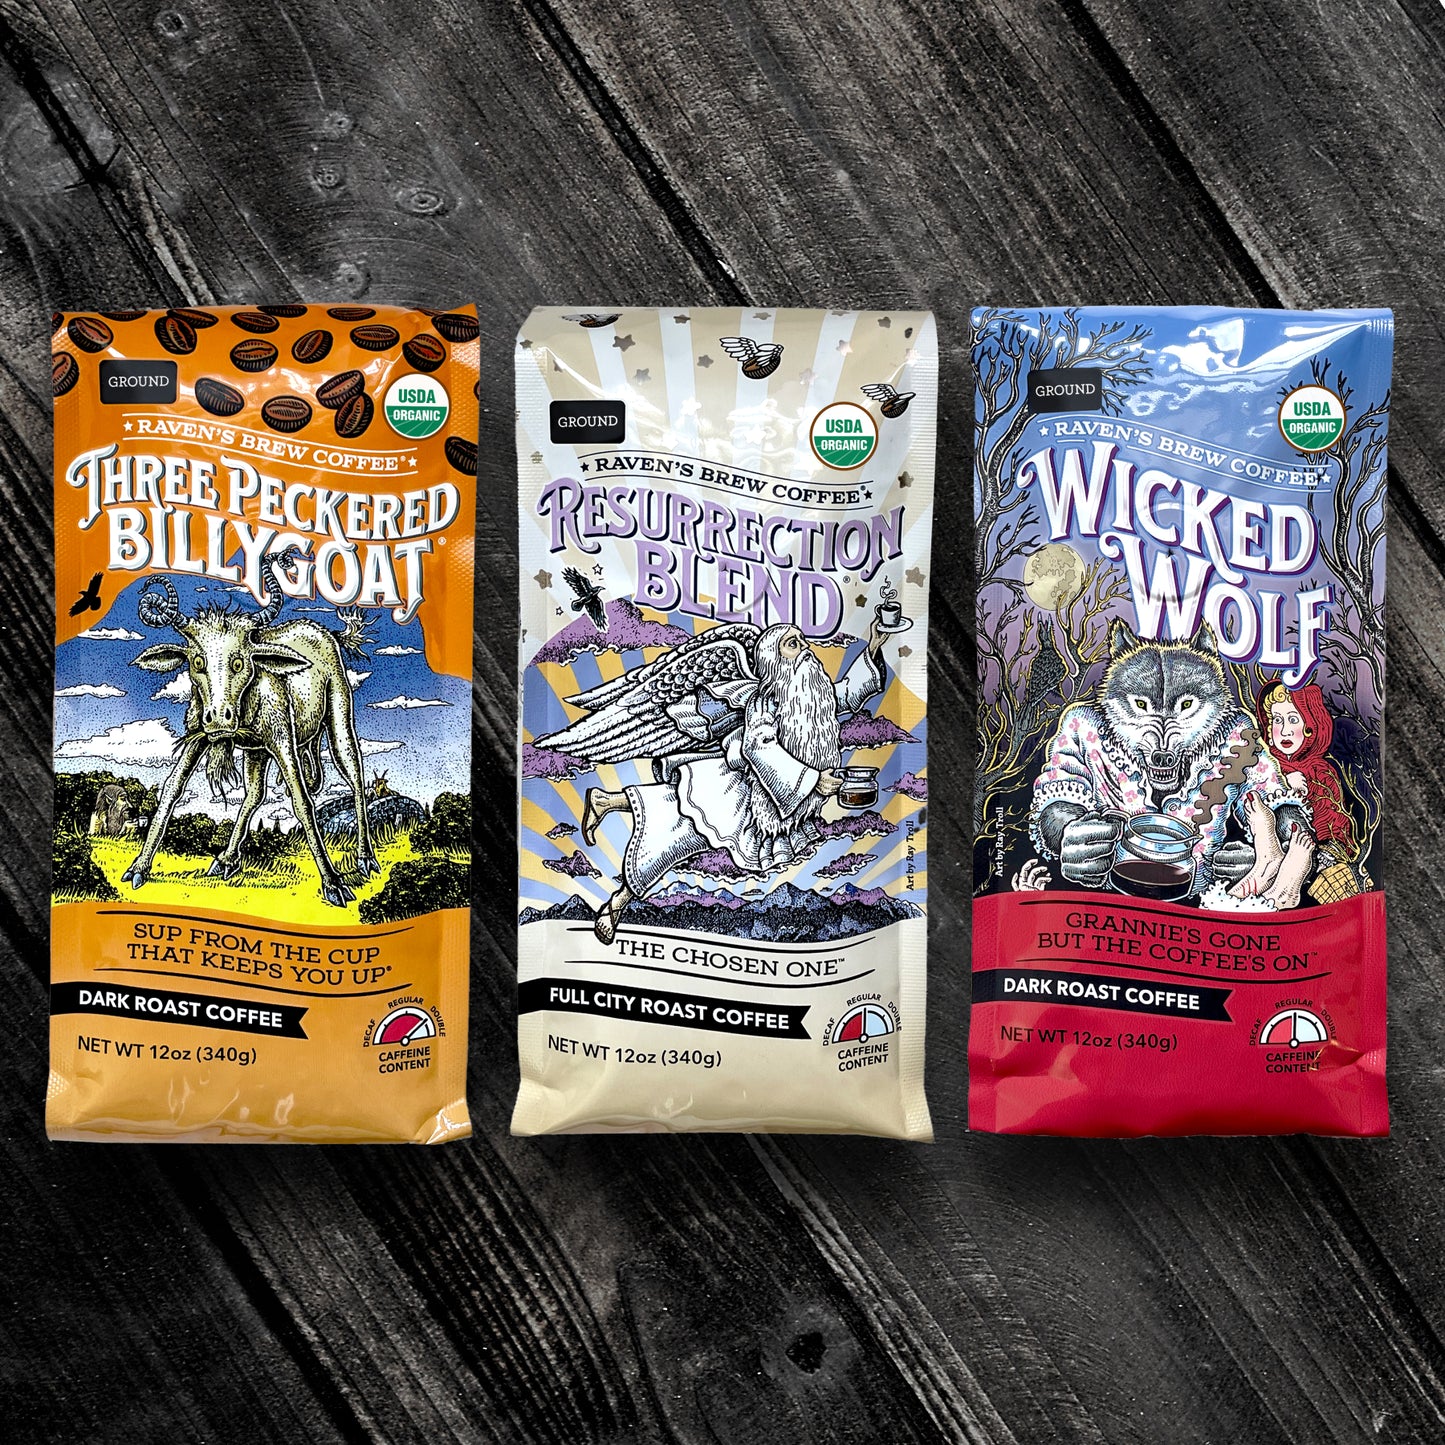 Three Peckered Billy Goat® Coffee, Resurrection® Blend Coffee and Wicked Wolf® Coffee Organic Ground Cold Brew Pack